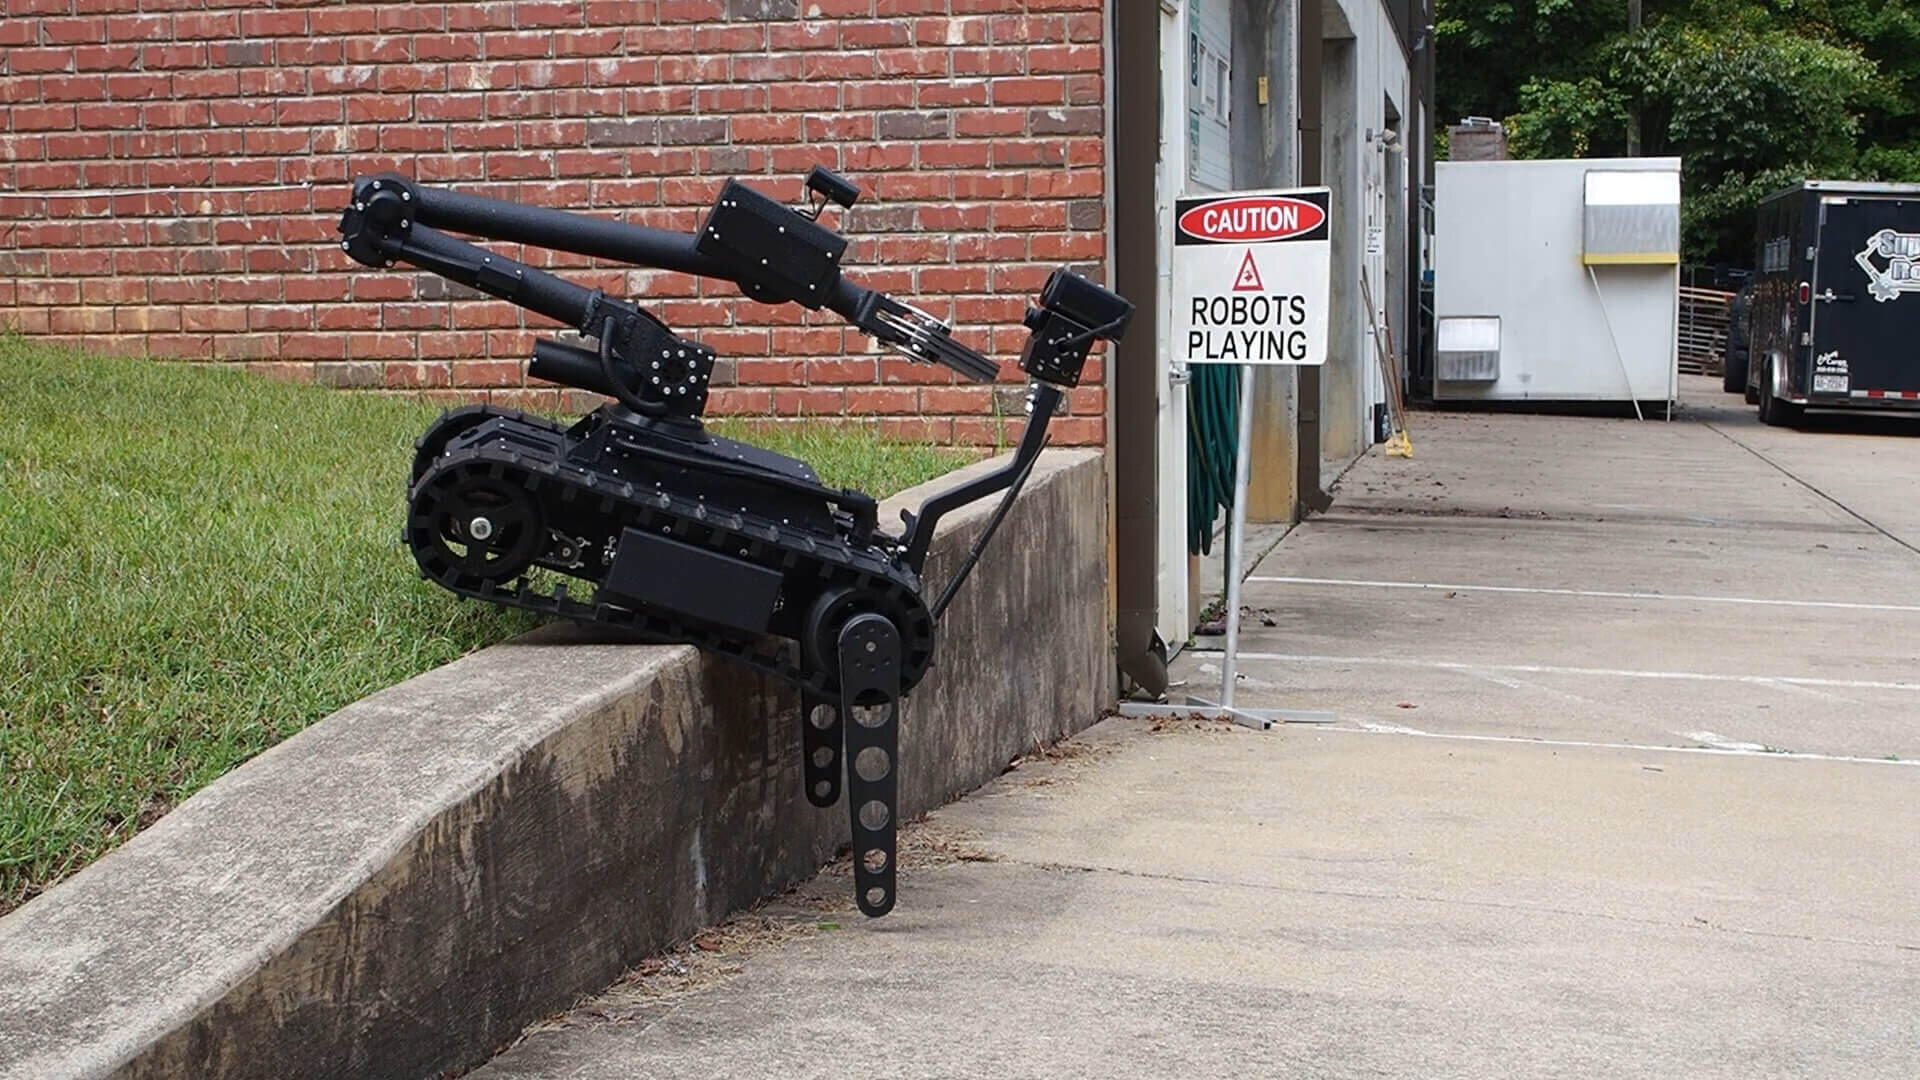 Tactical robot scales tall curb